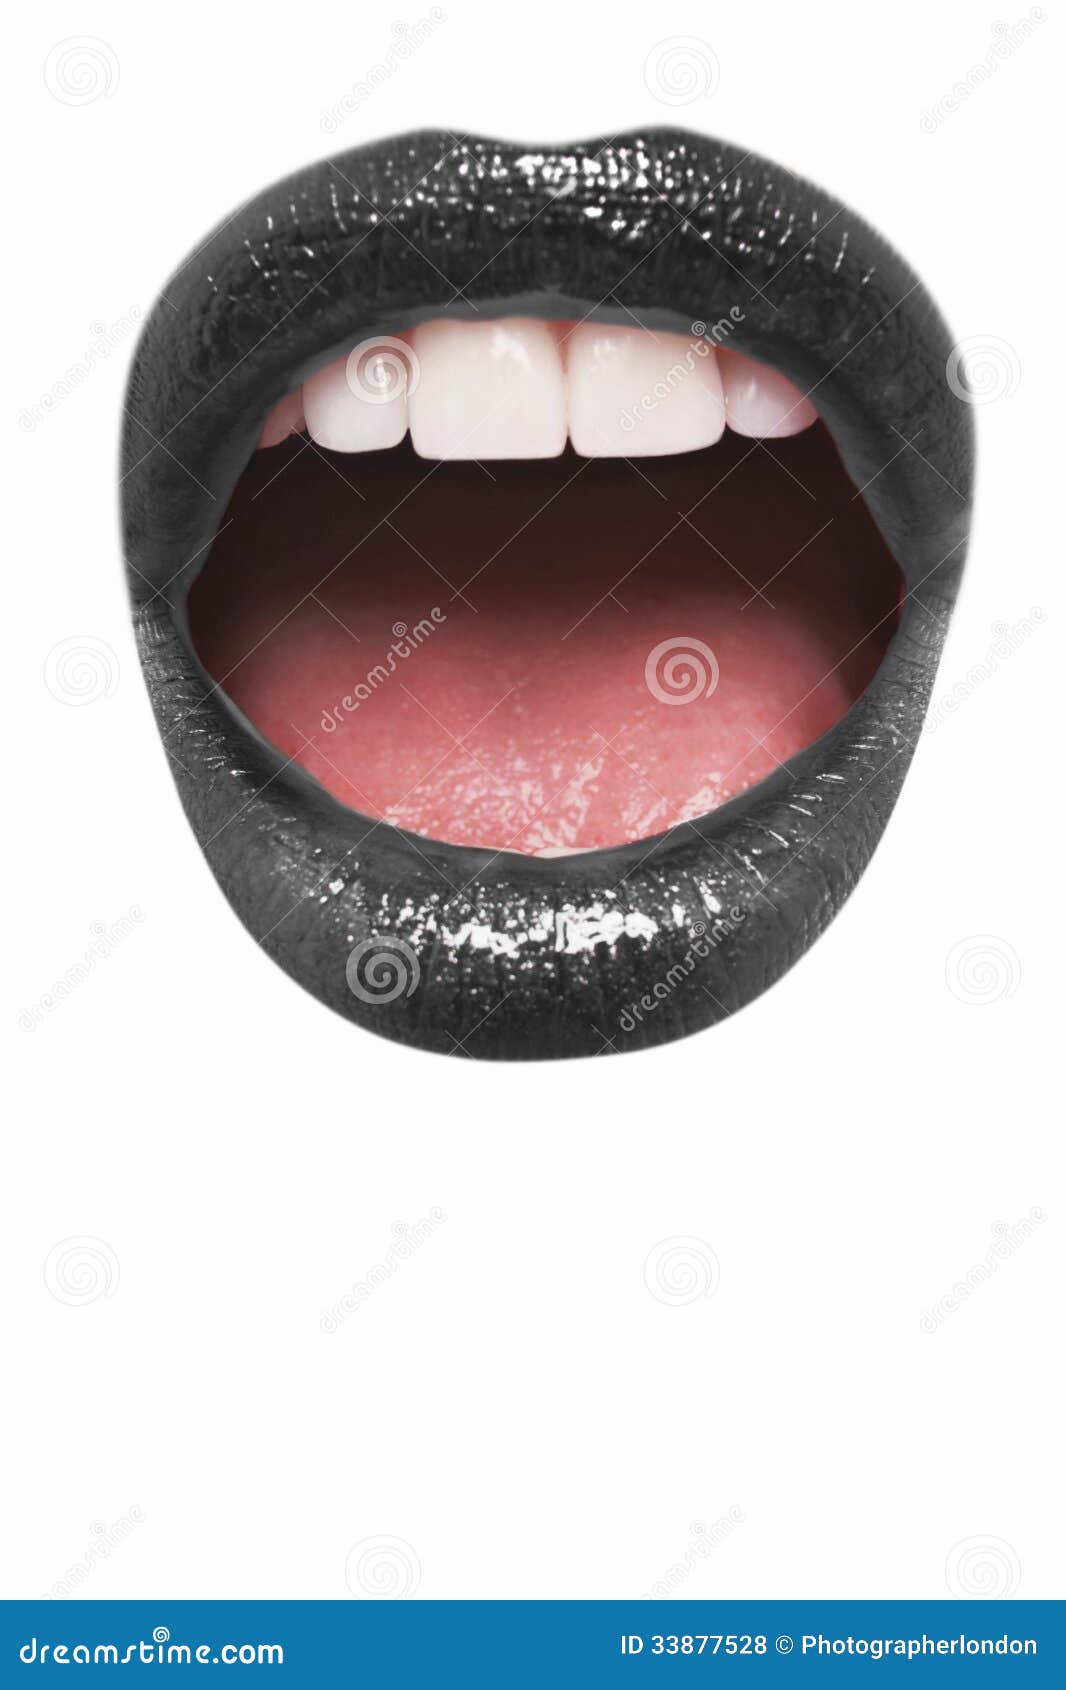 close-up view of female wearing black lipstick with mouth open over white background